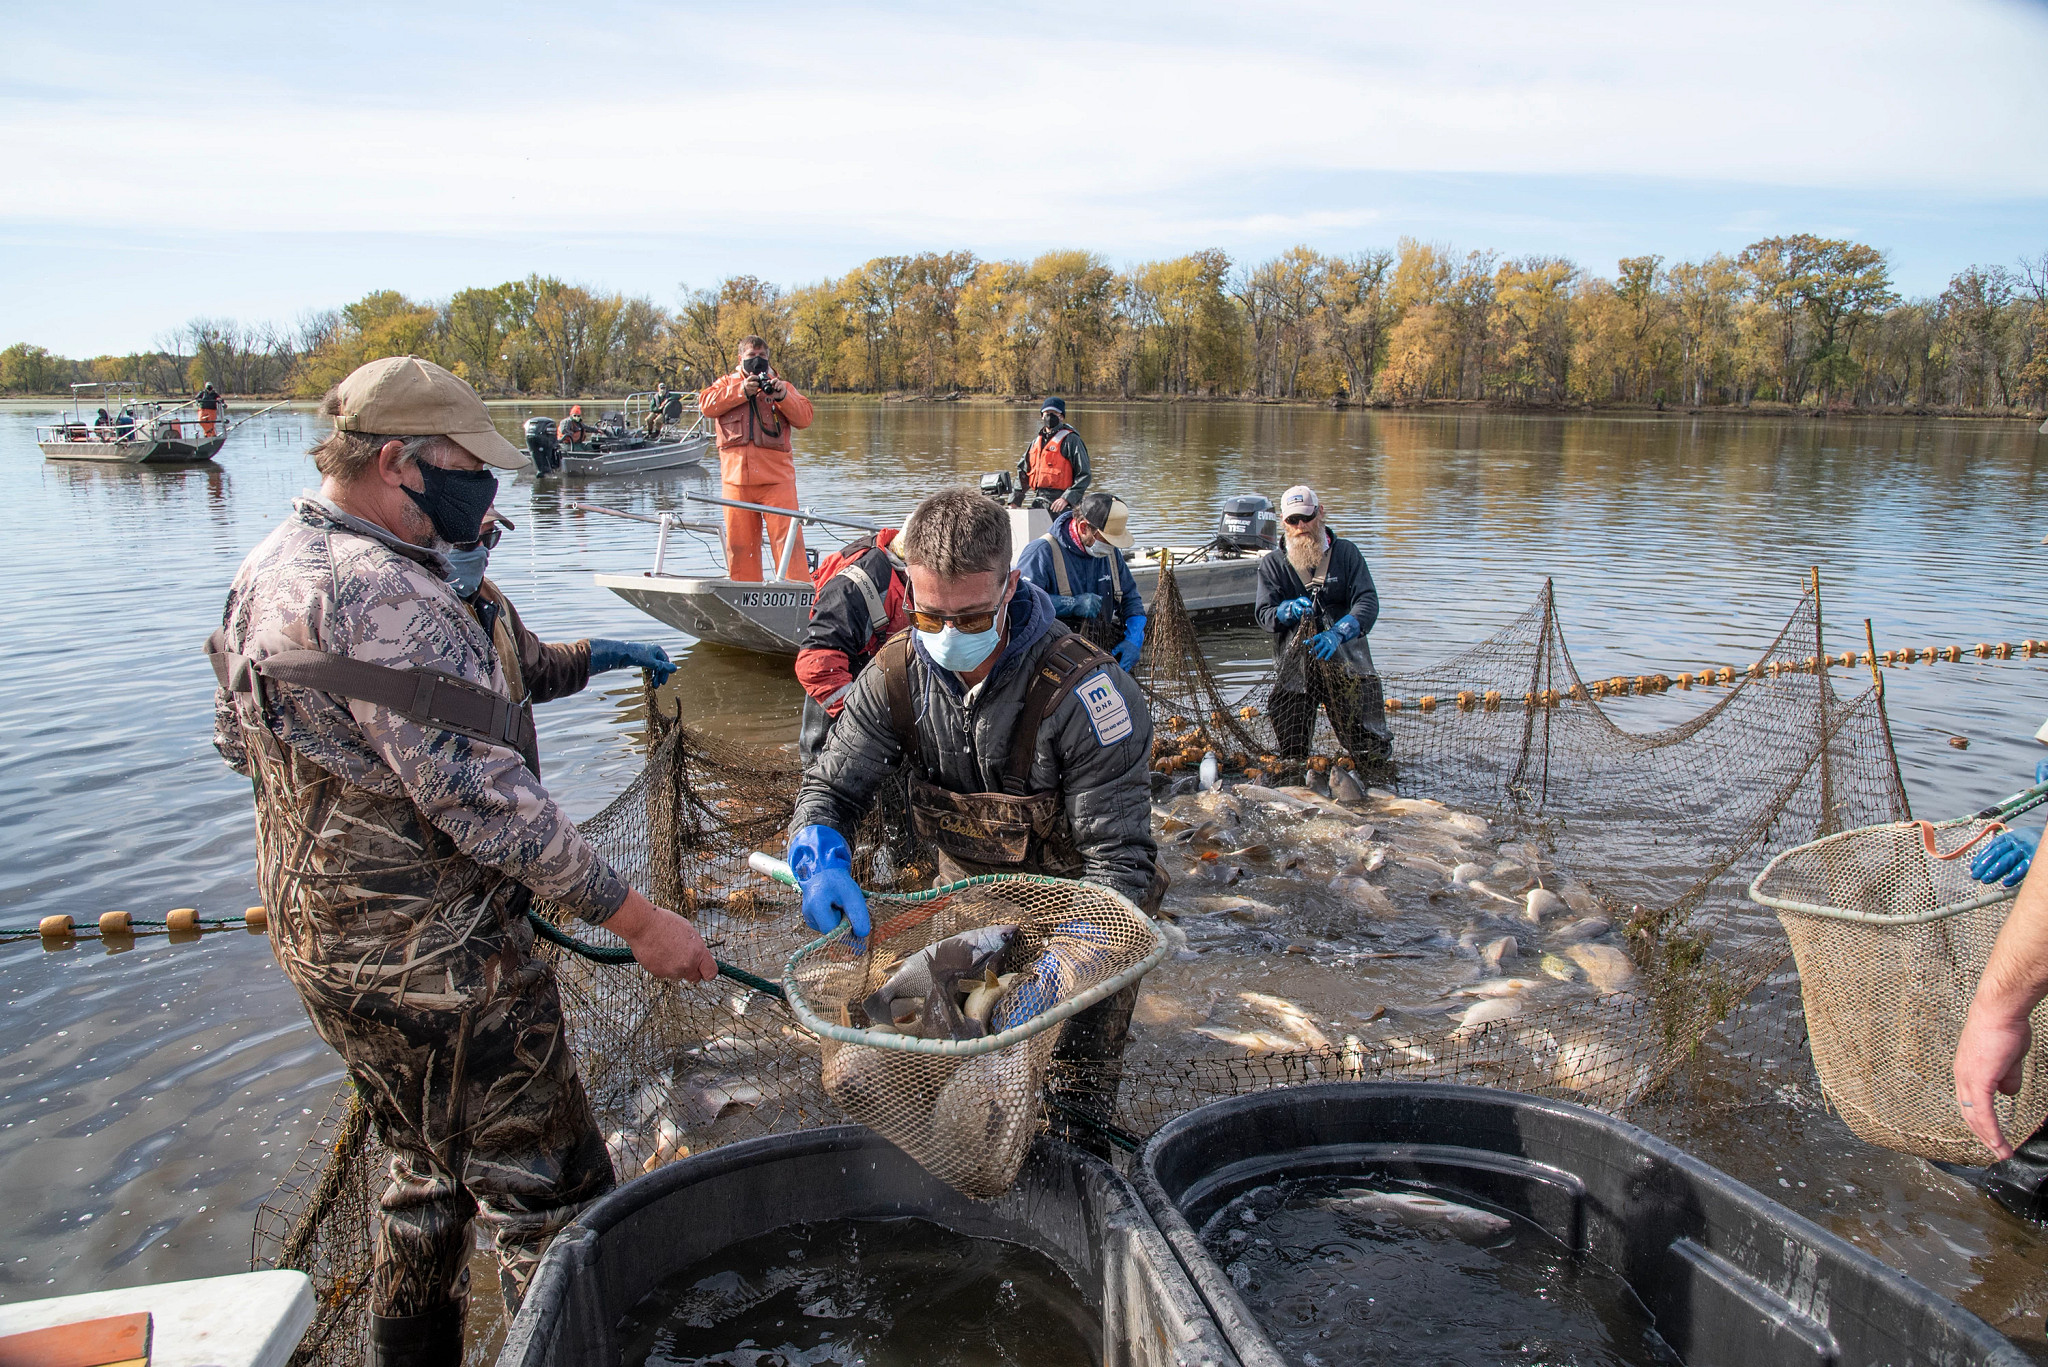 MUM 2 Operation (Modified Unified Method) DNR partnership with USFWS and USGS to use large commercial nets to find Invasive carp